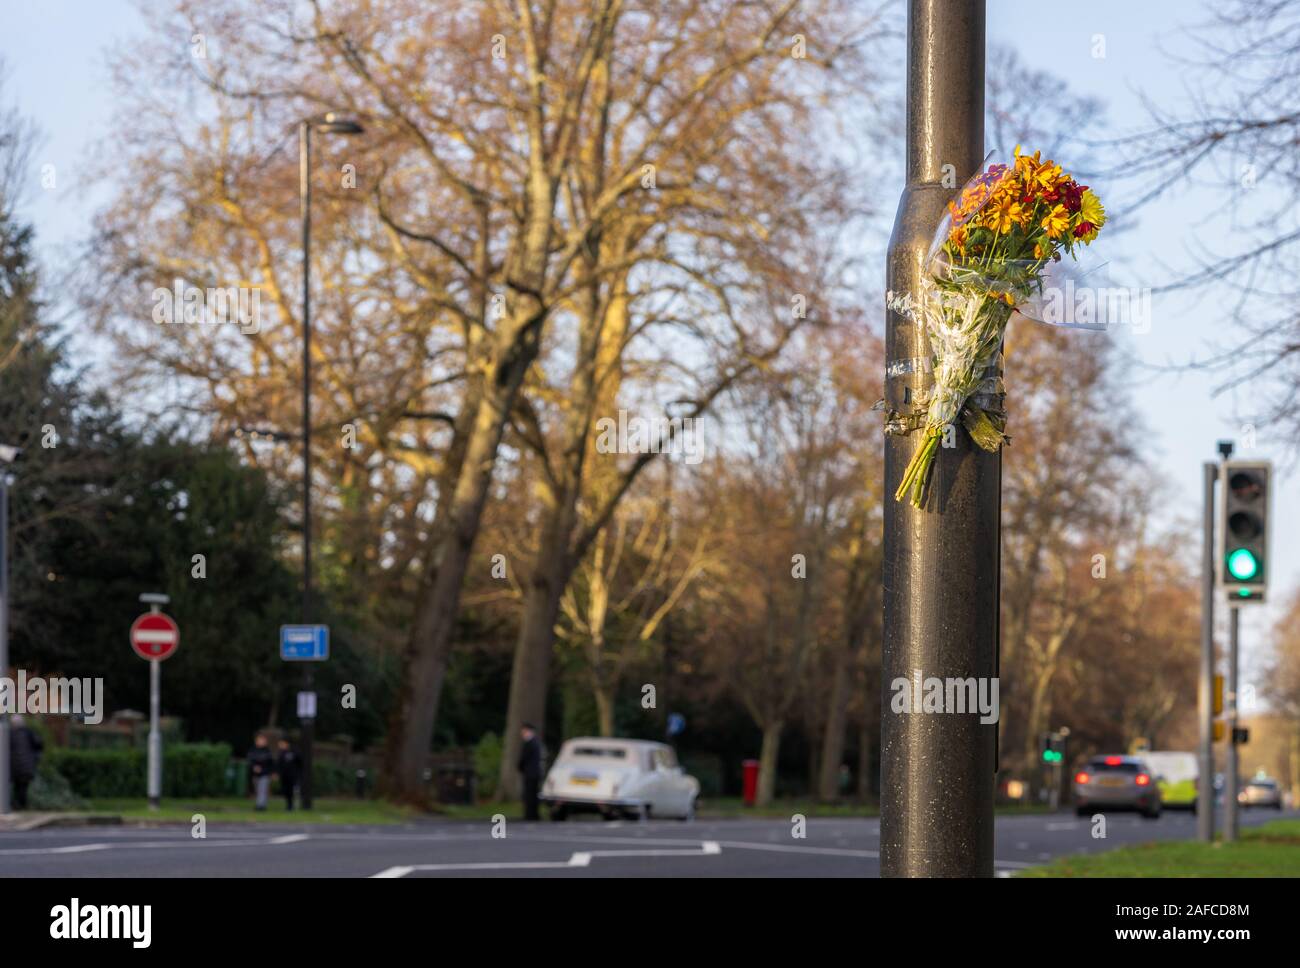 Flowers on a mast along a road near a set of traffic lights to honour the victims of a road accident, Southampton, UK Stock Photo